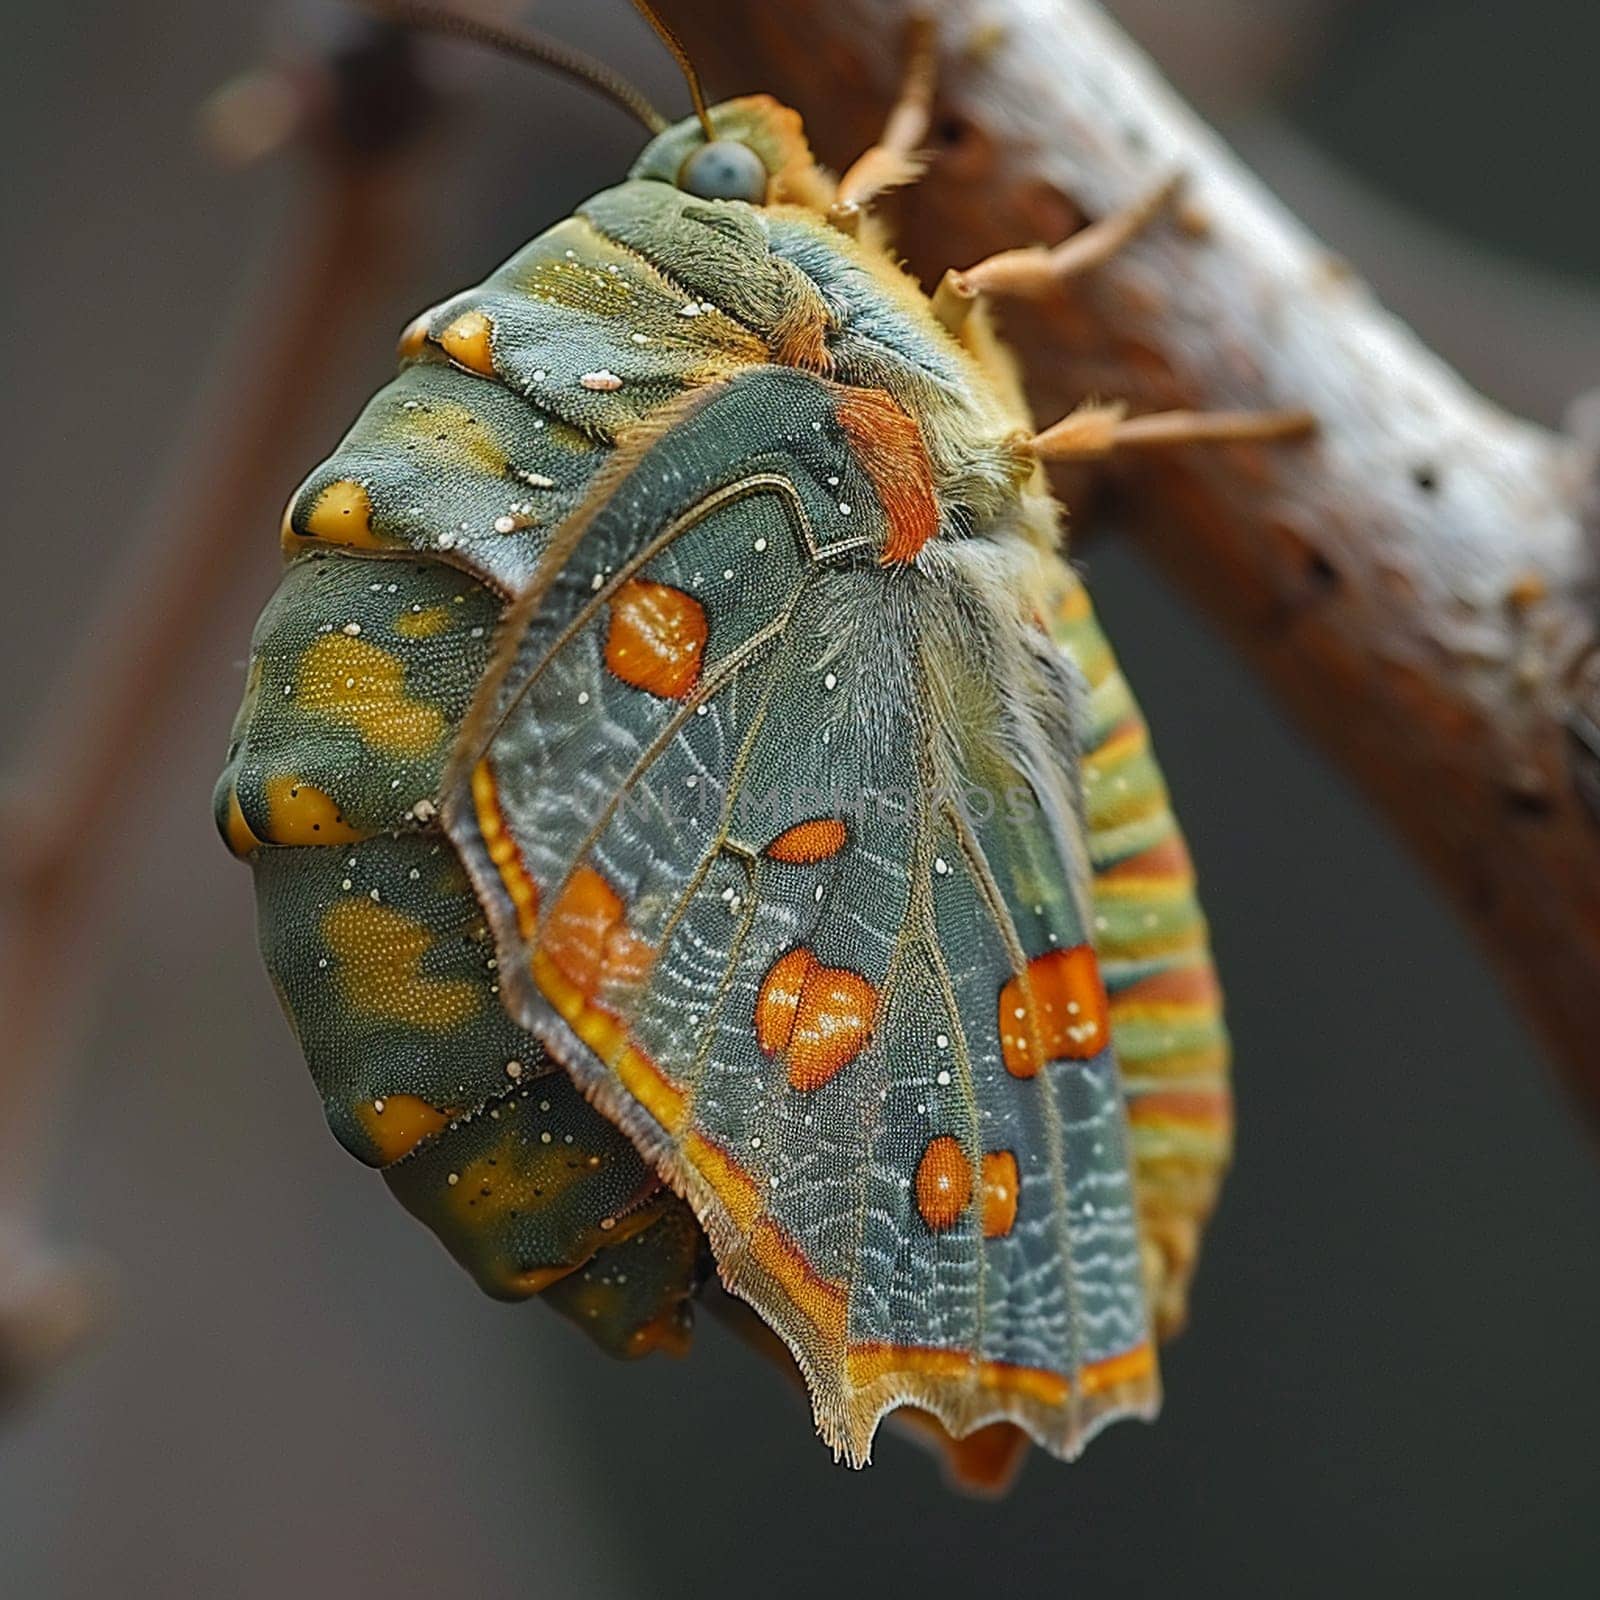 A butterfly emerging from its chrysalis, the first flutter of wings